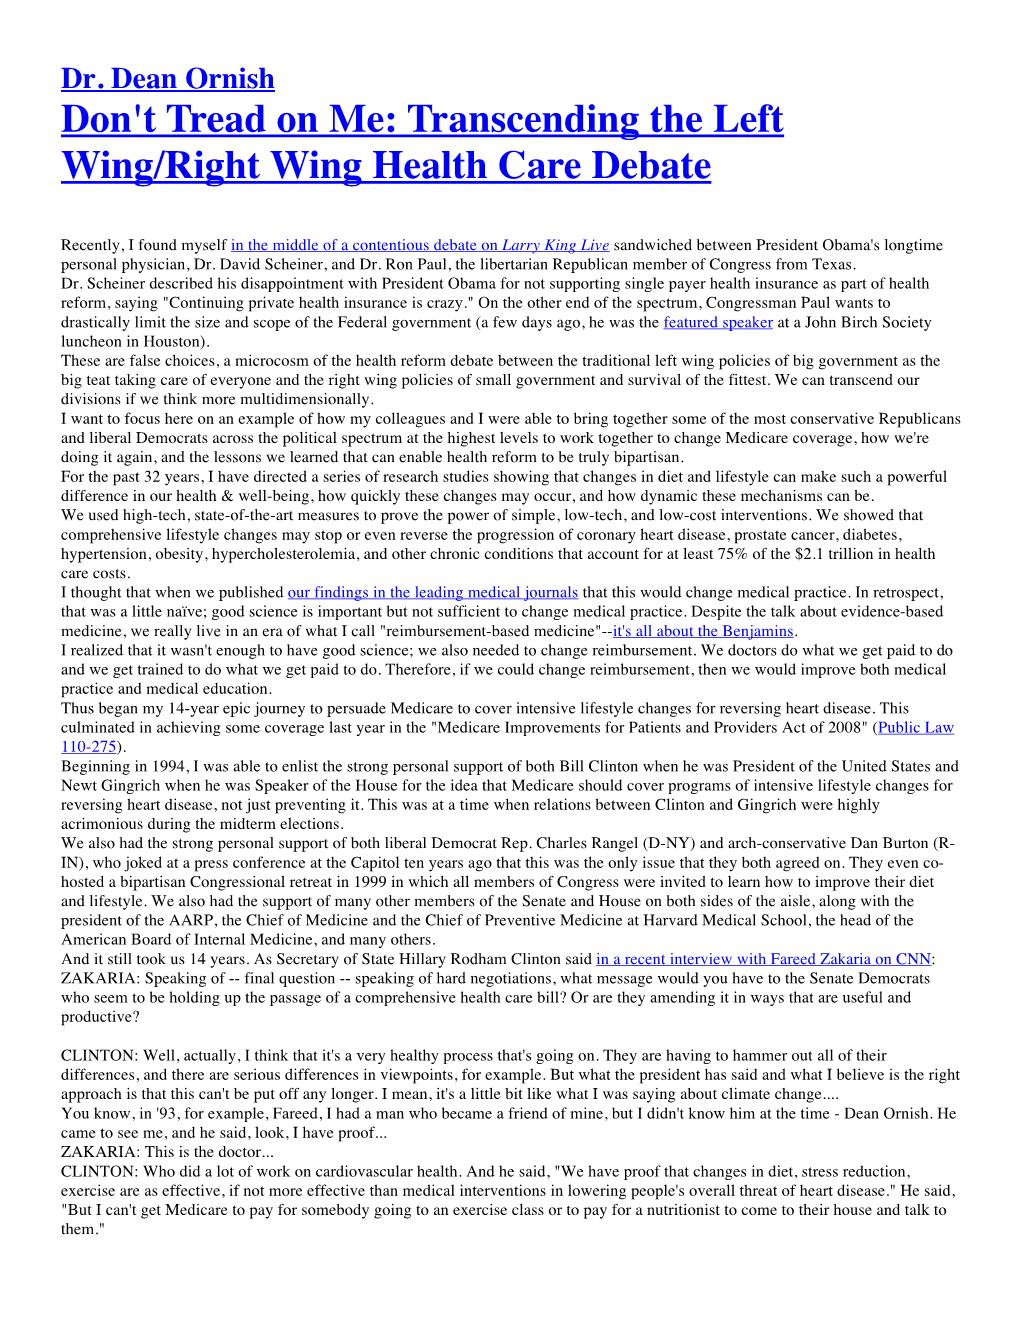 Don't Tread on Me: Transcending the Left Wing/Right Wing Health Care Debate